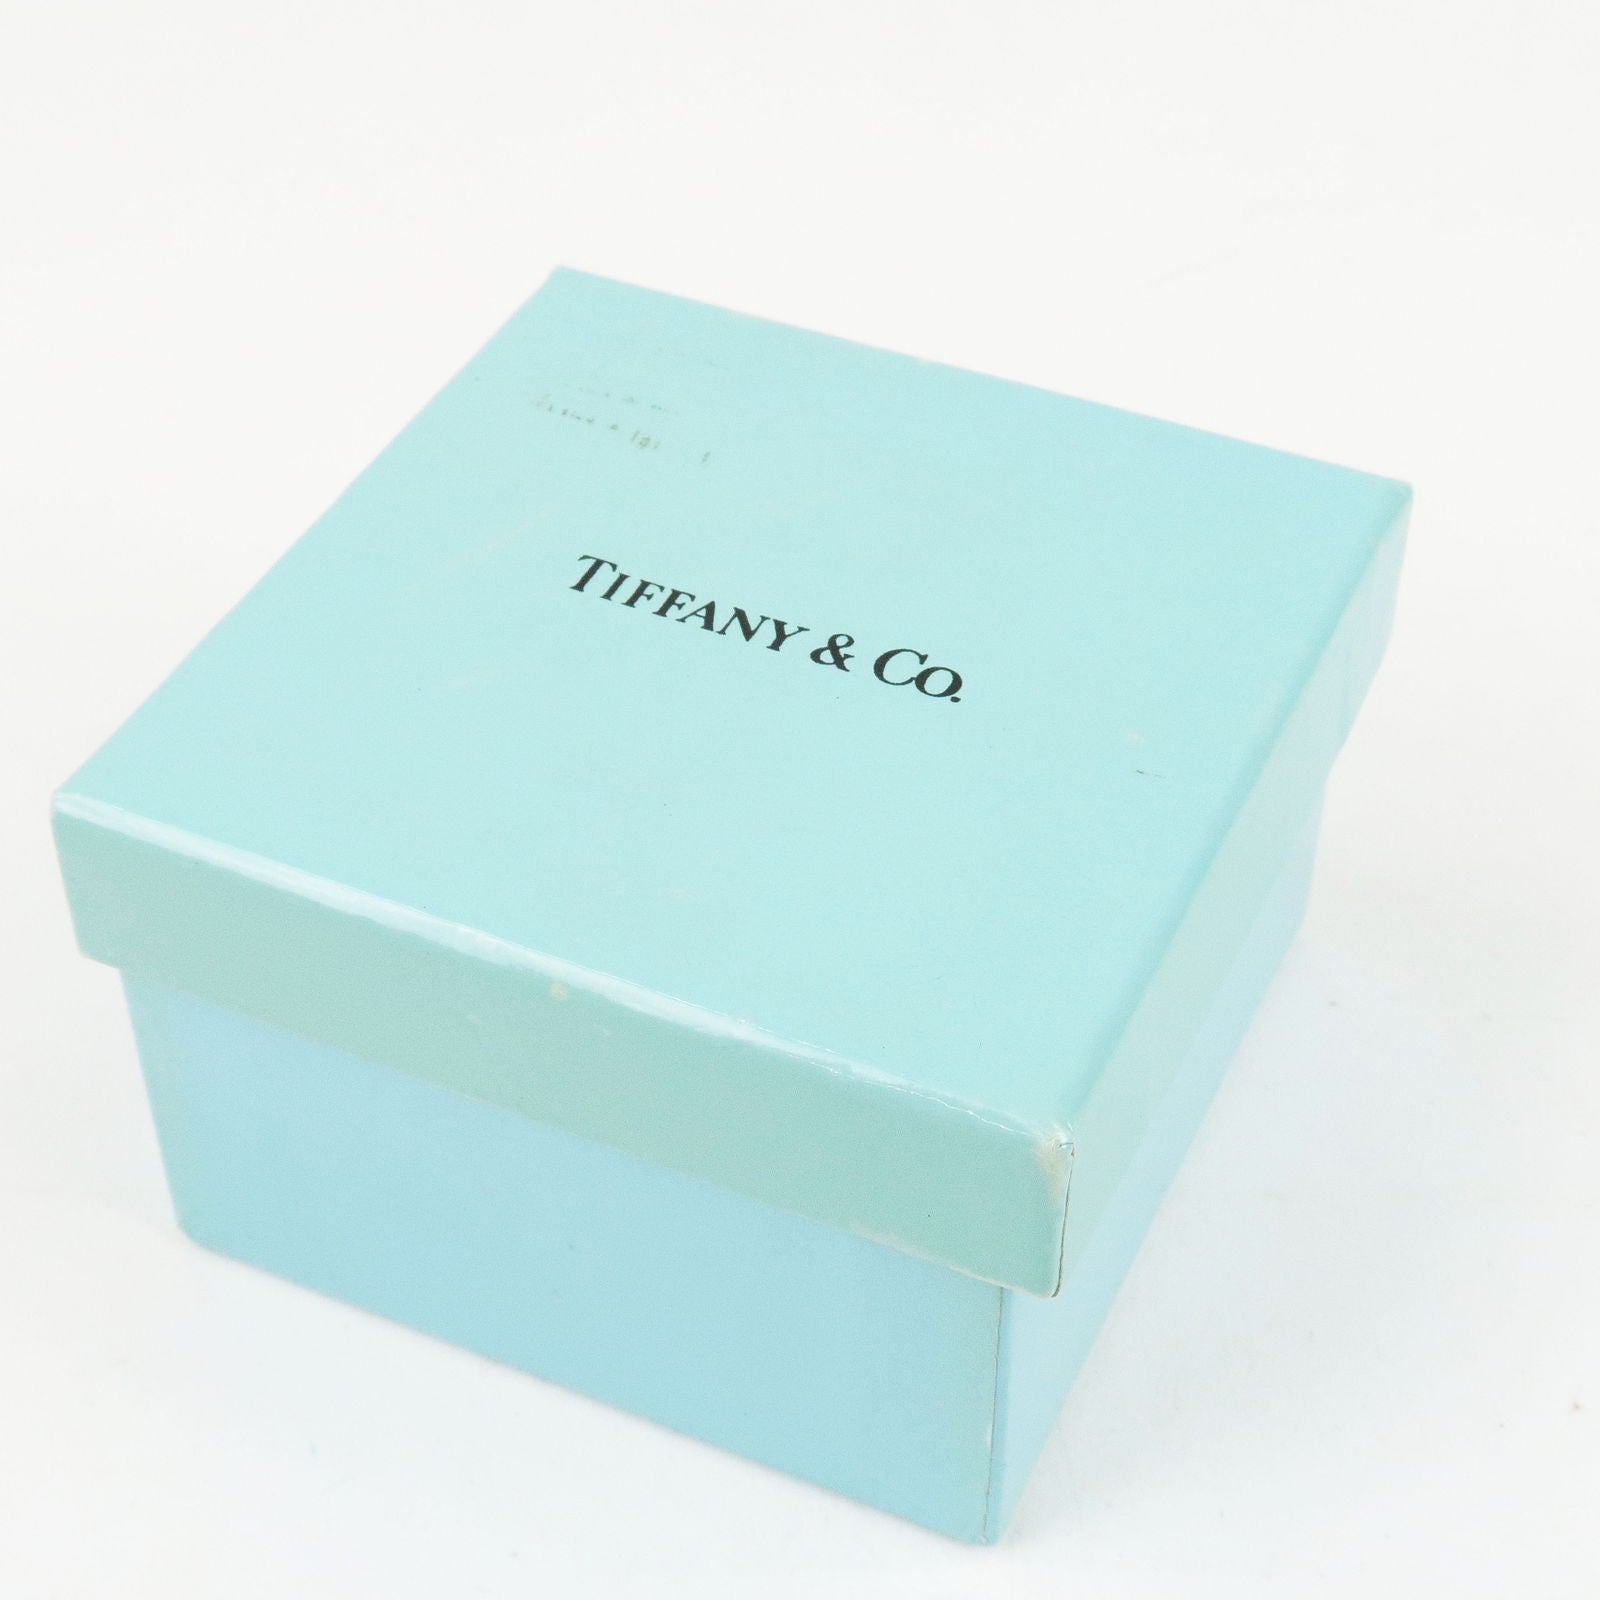 Tiffany & Co., Jewelry, Authentic Tiffany And Co Packaging Set